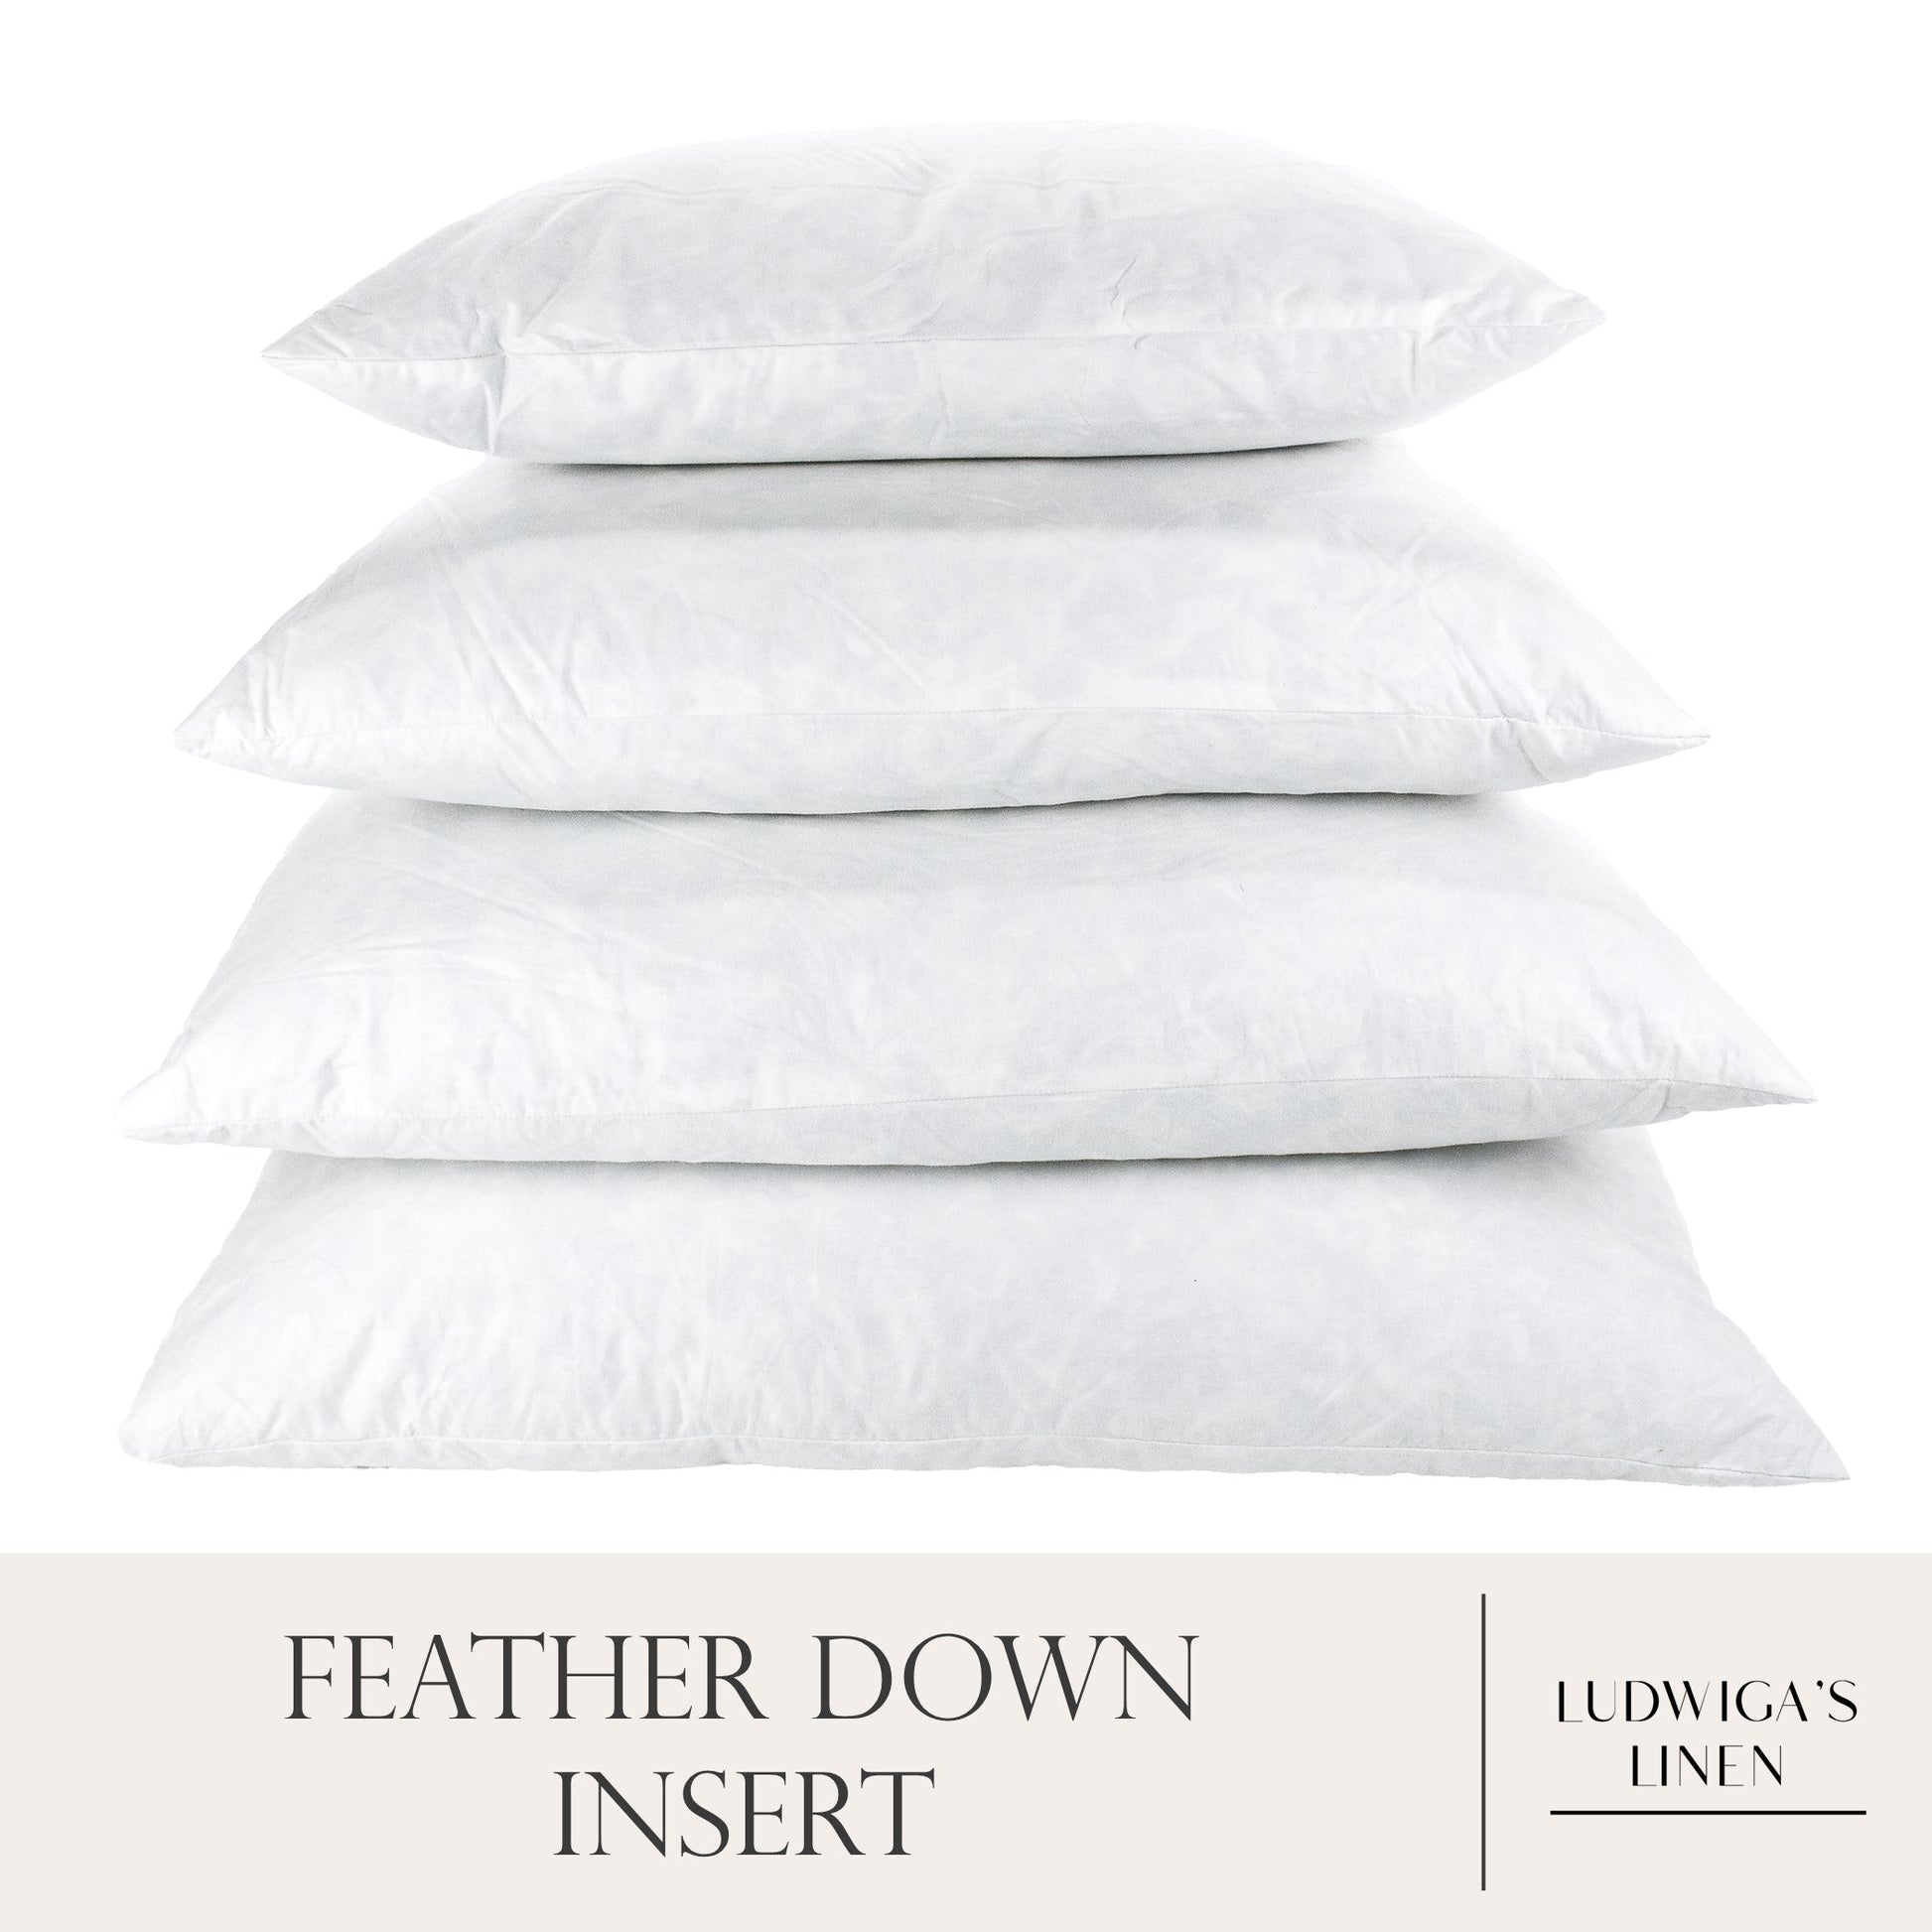 Luxury hypoallergenic feather/down pillow inserts